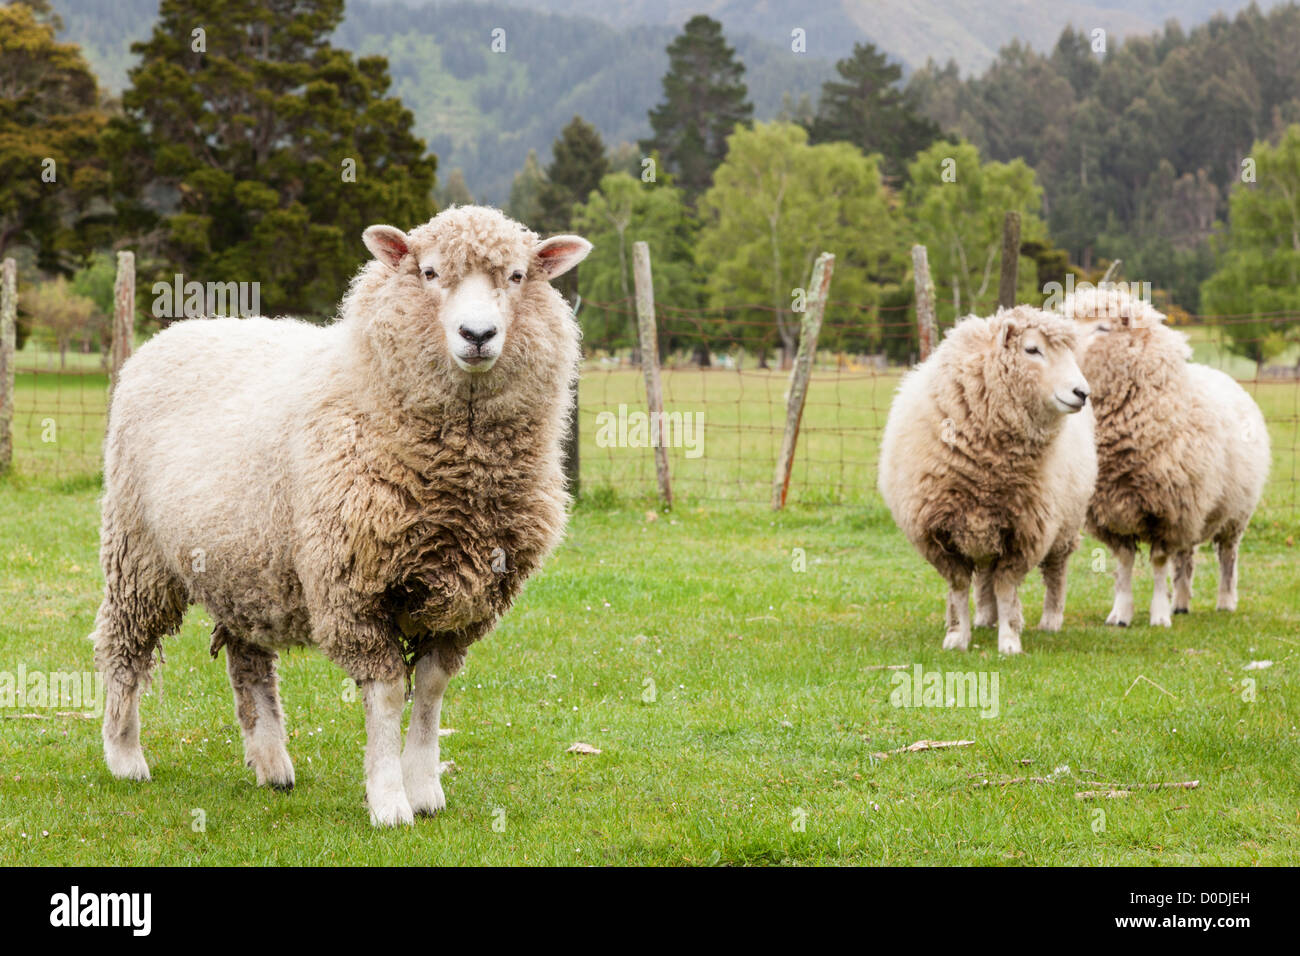 Three mixed breed New Zealand sheep in a paddock or field. Stock Photo